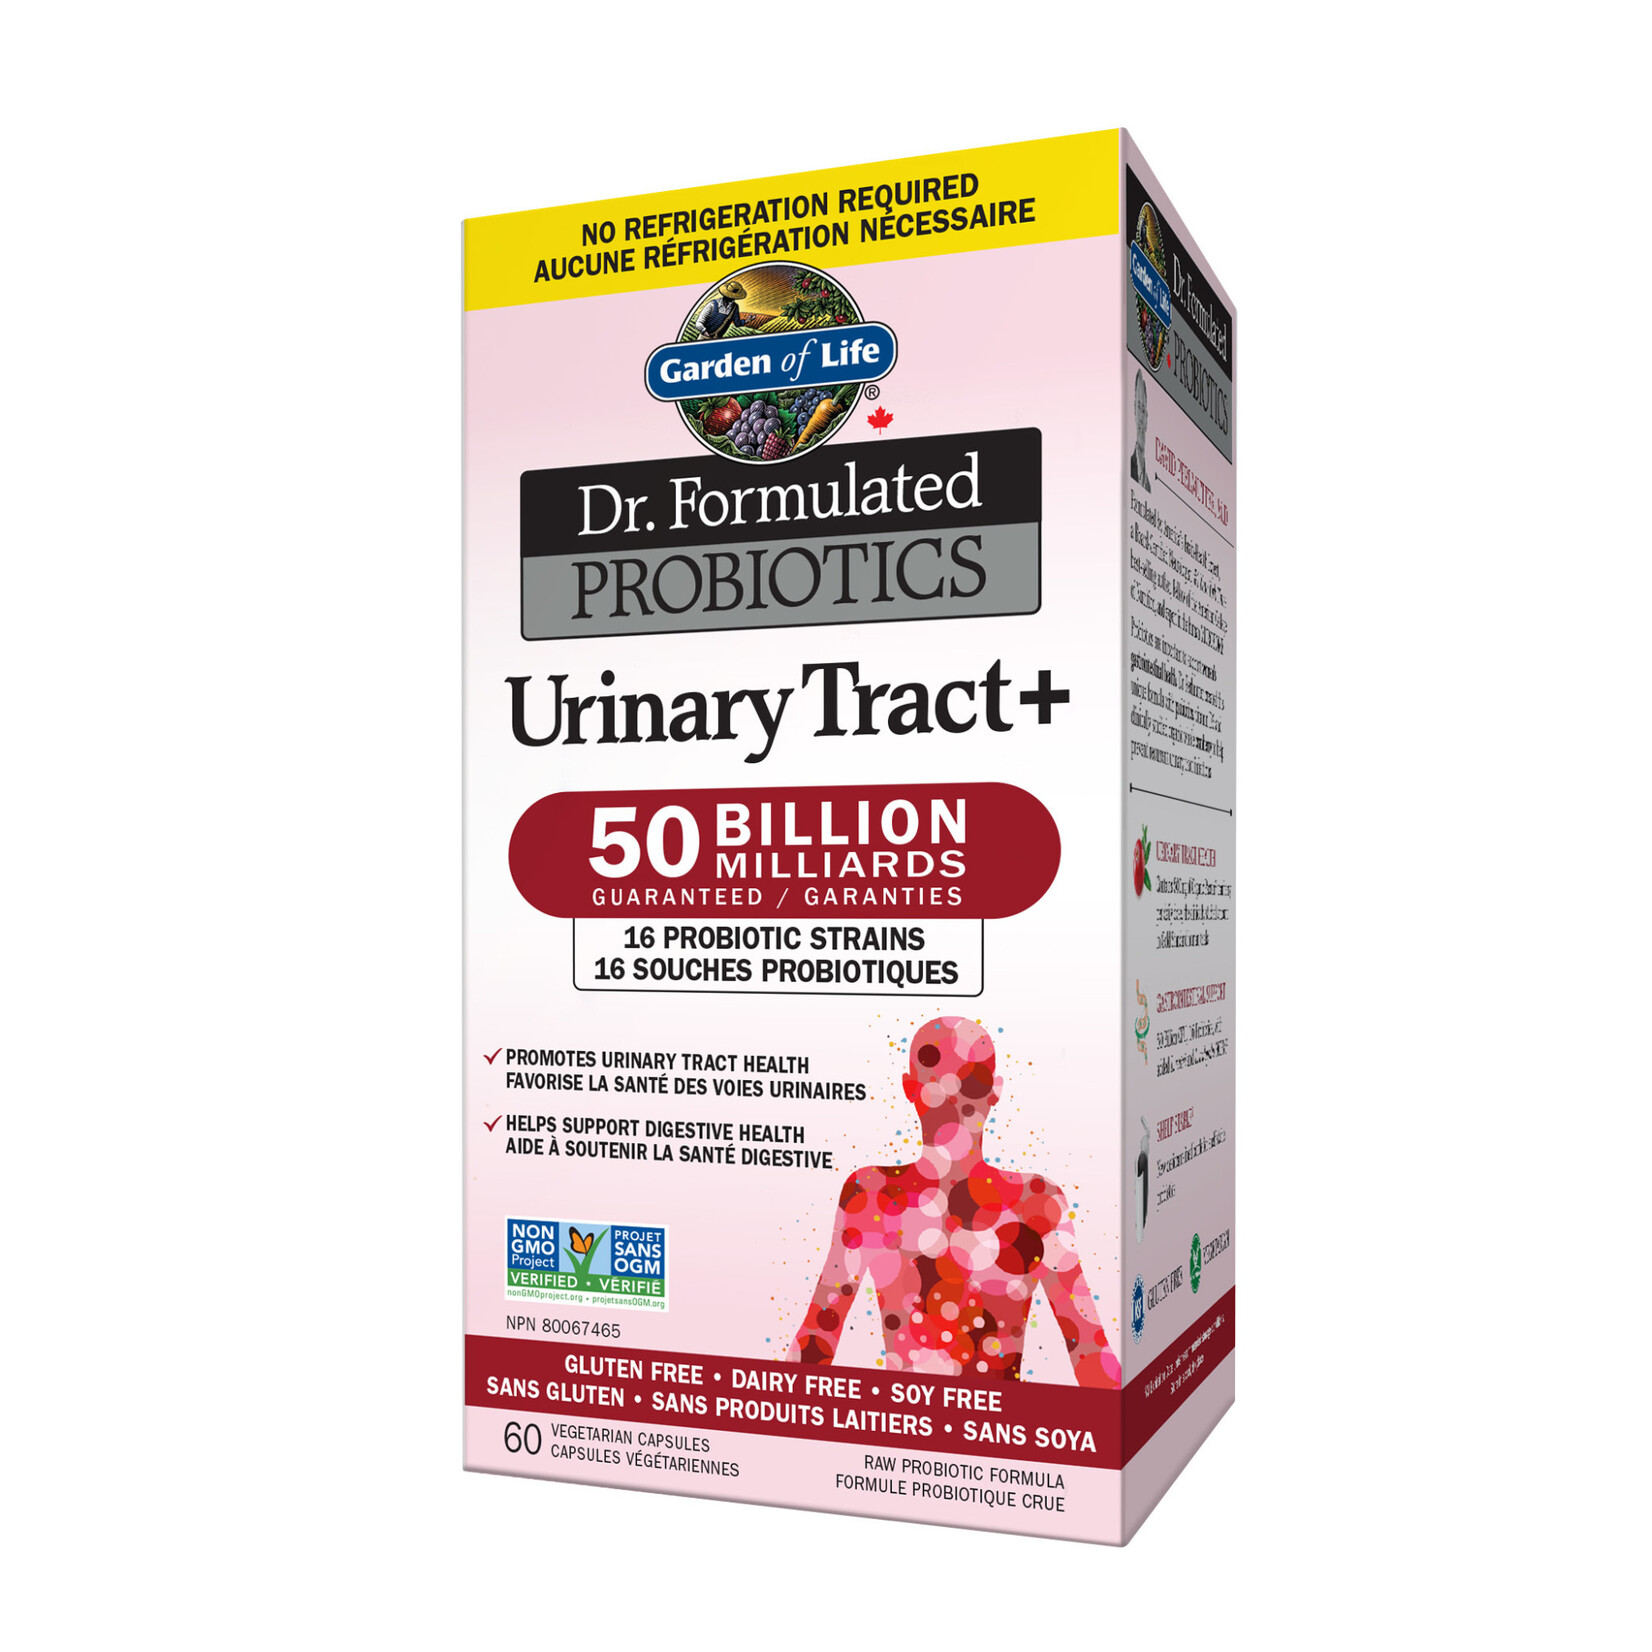 GARDEN OF LIFE GARDEN OF LIFE DR F URINARY TRACT+ 50-B SS 60VCAPS